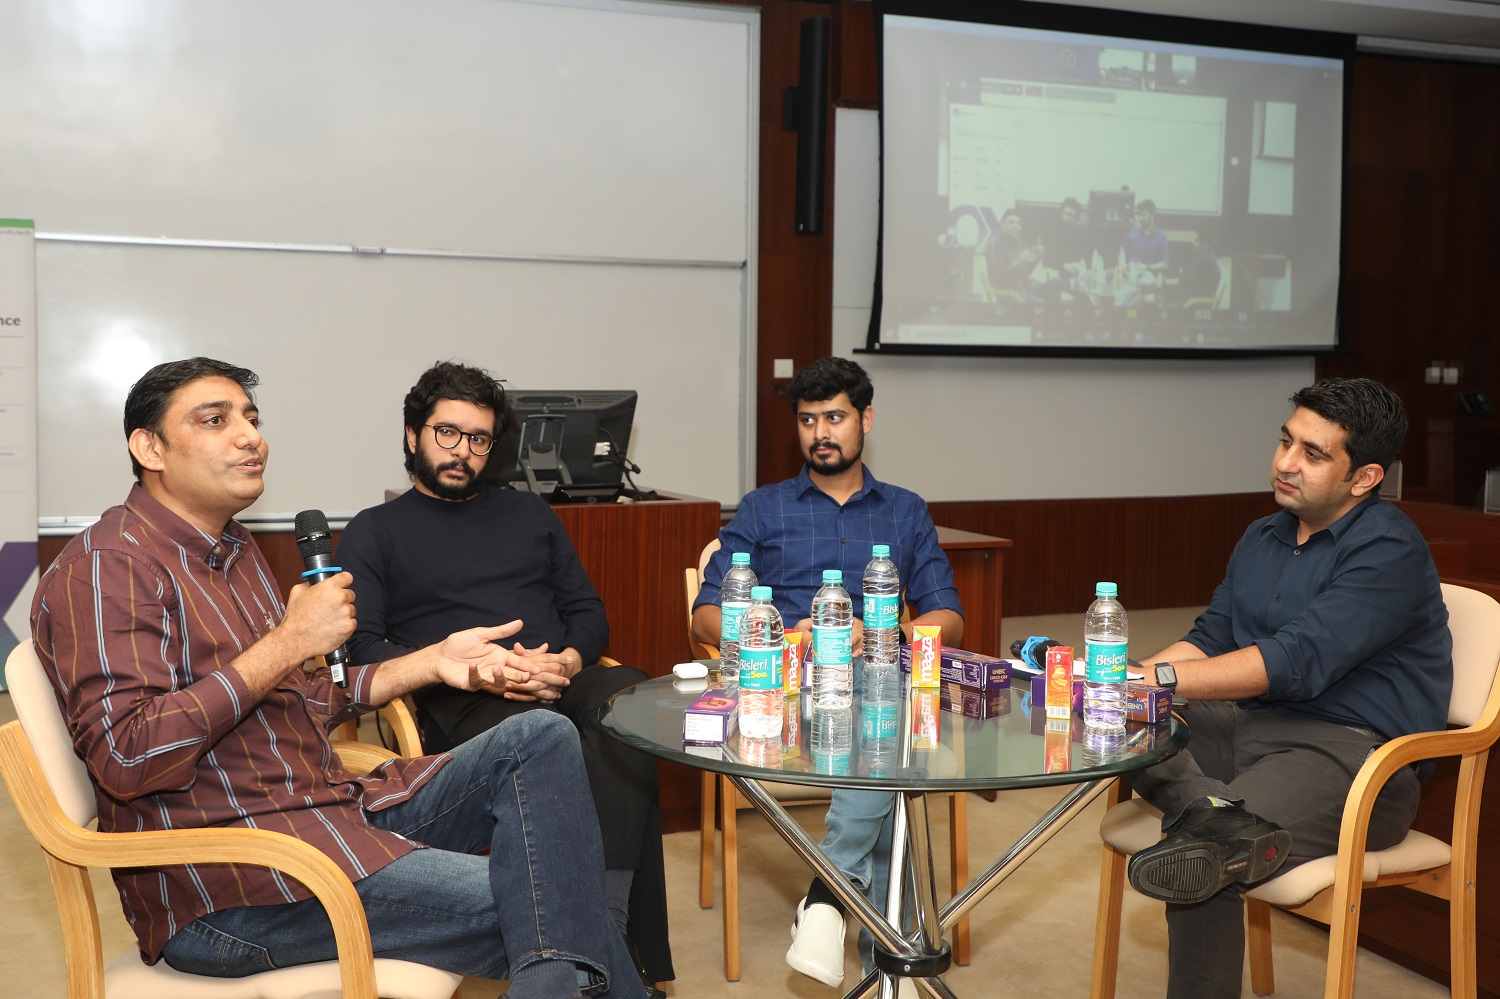 (L-R) Himanshu Doshi, Chief Product Officer, Servify; Akshay Hegde, Co-founder, ShakeDeal; Abhinav Pathak, Co-founder, Perpule, and Prof. Mayank Nagpal, faculty from the Marketing area, IIMB, at the panel discussion on: ‘Achieving Procurement Excellence and Re-innovating the Customer Shopping Experience’.